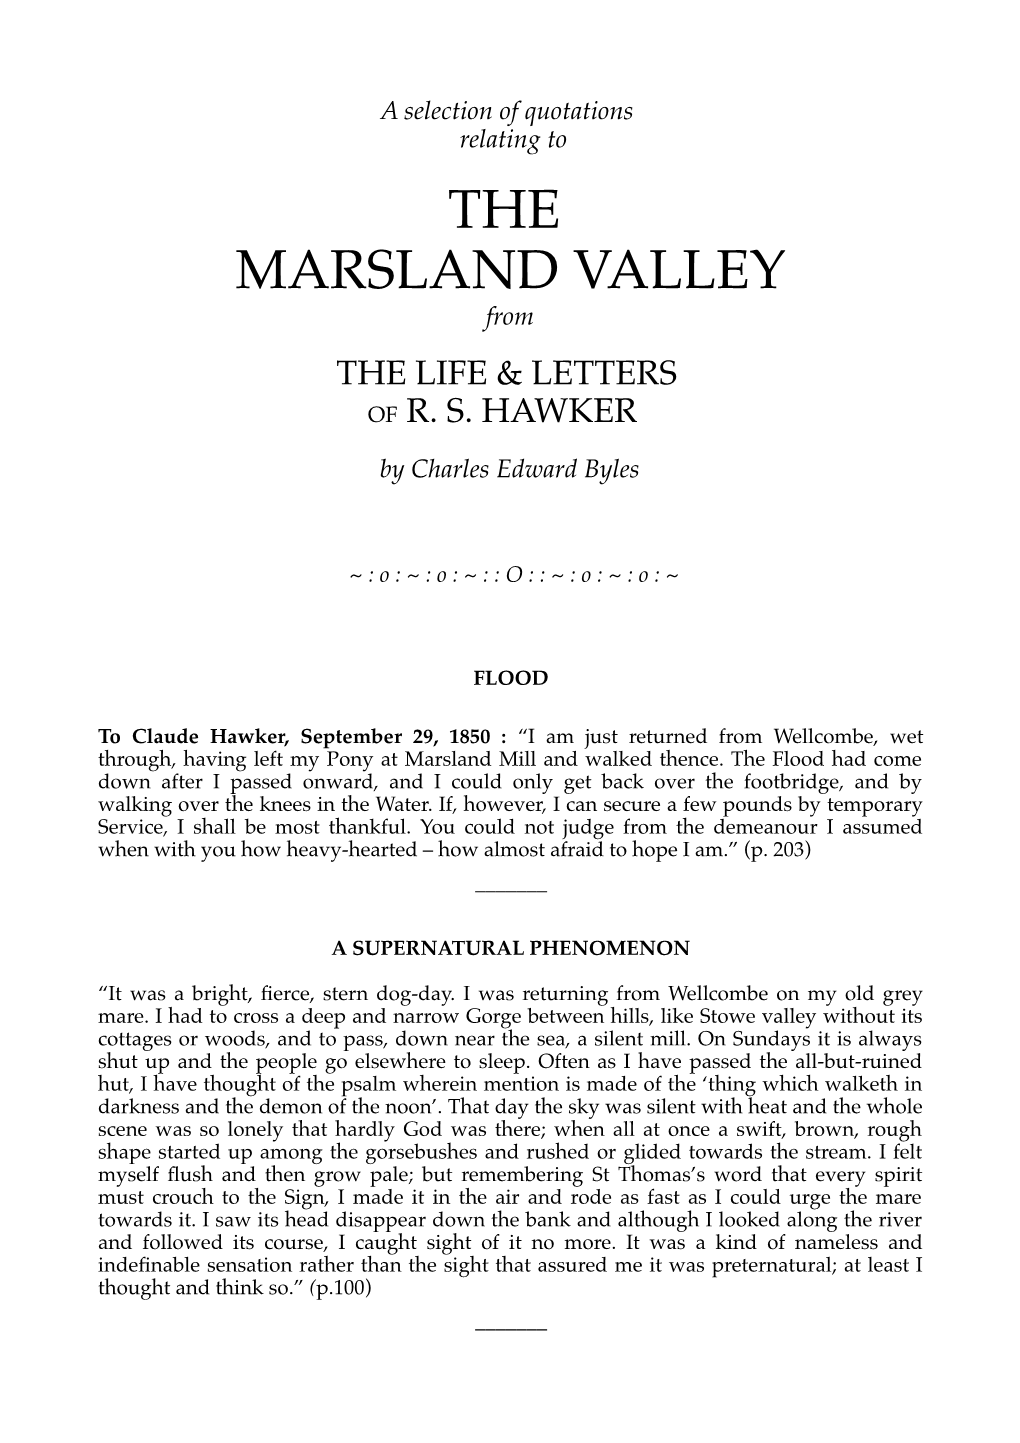 THE MARSLAND VALLEY from the LIFE & LETTERS of R